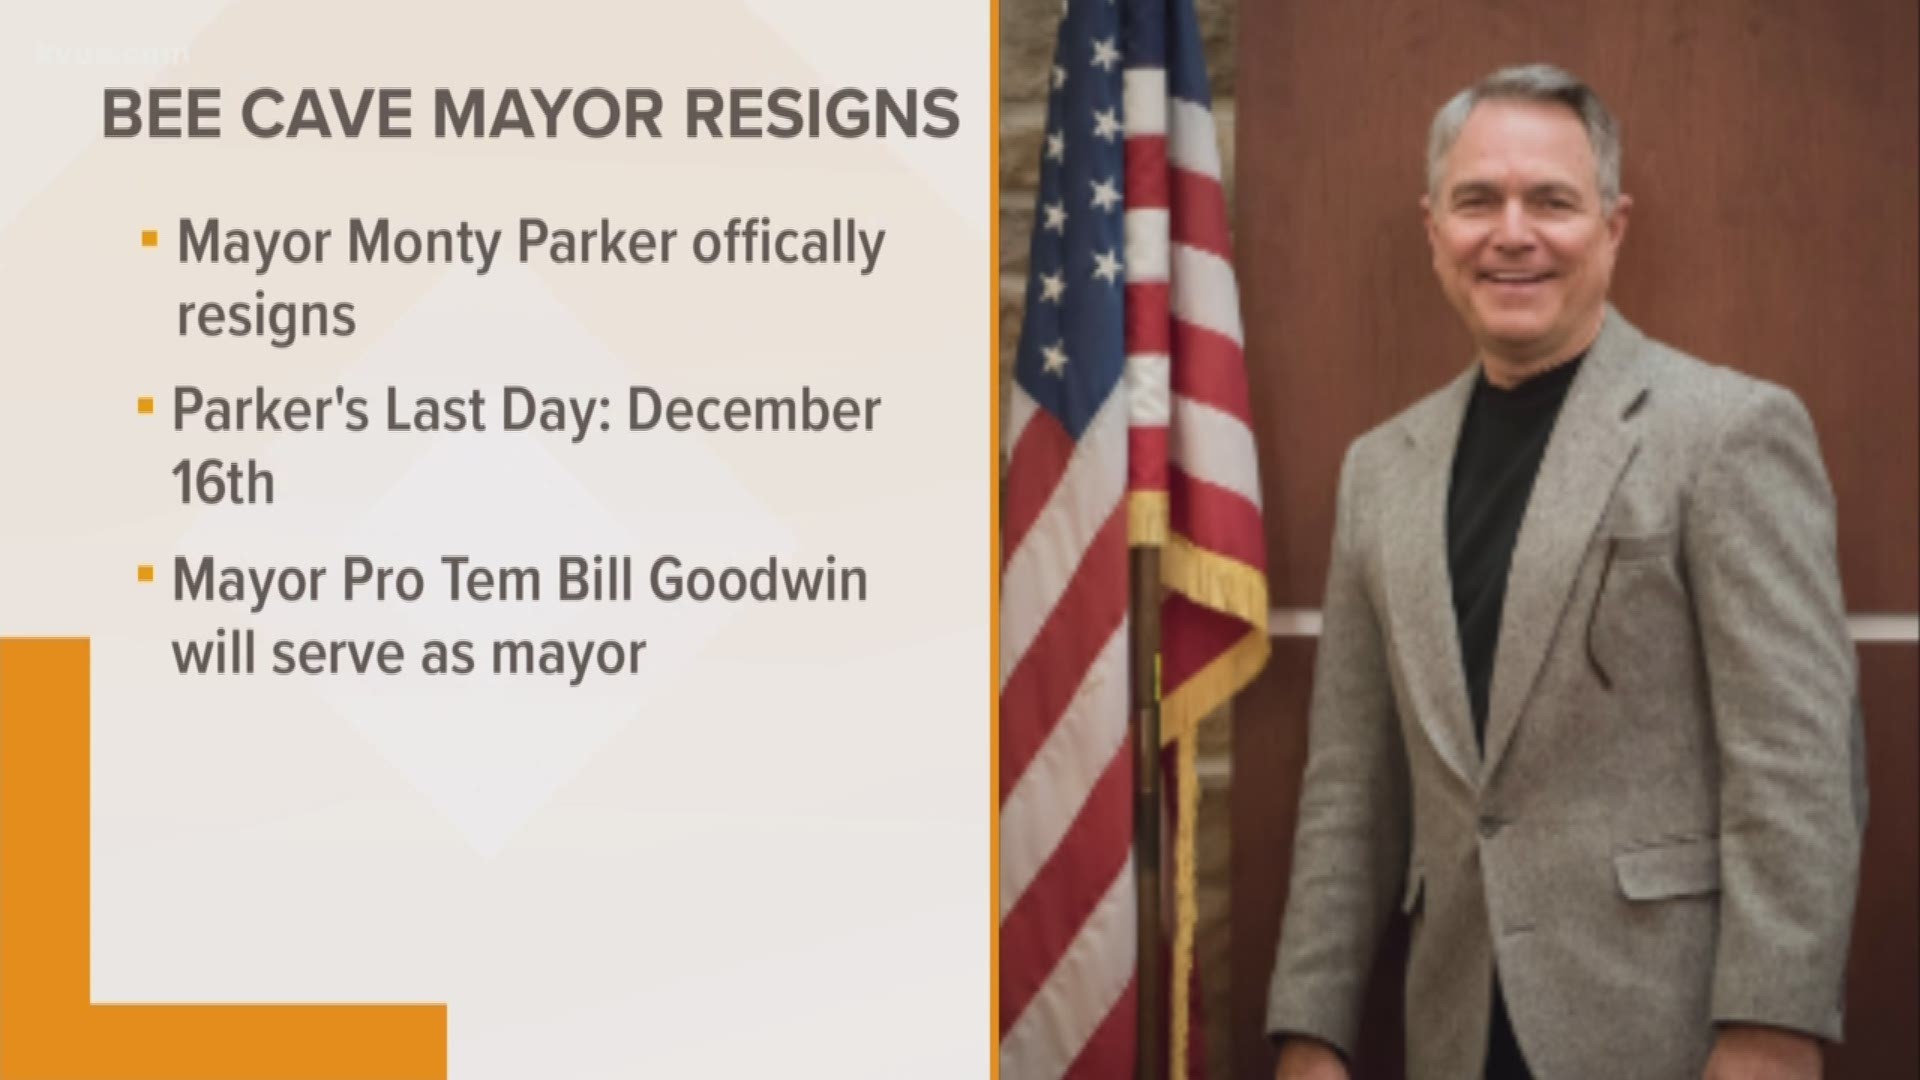 Monty Parker officially resigned on Monday.